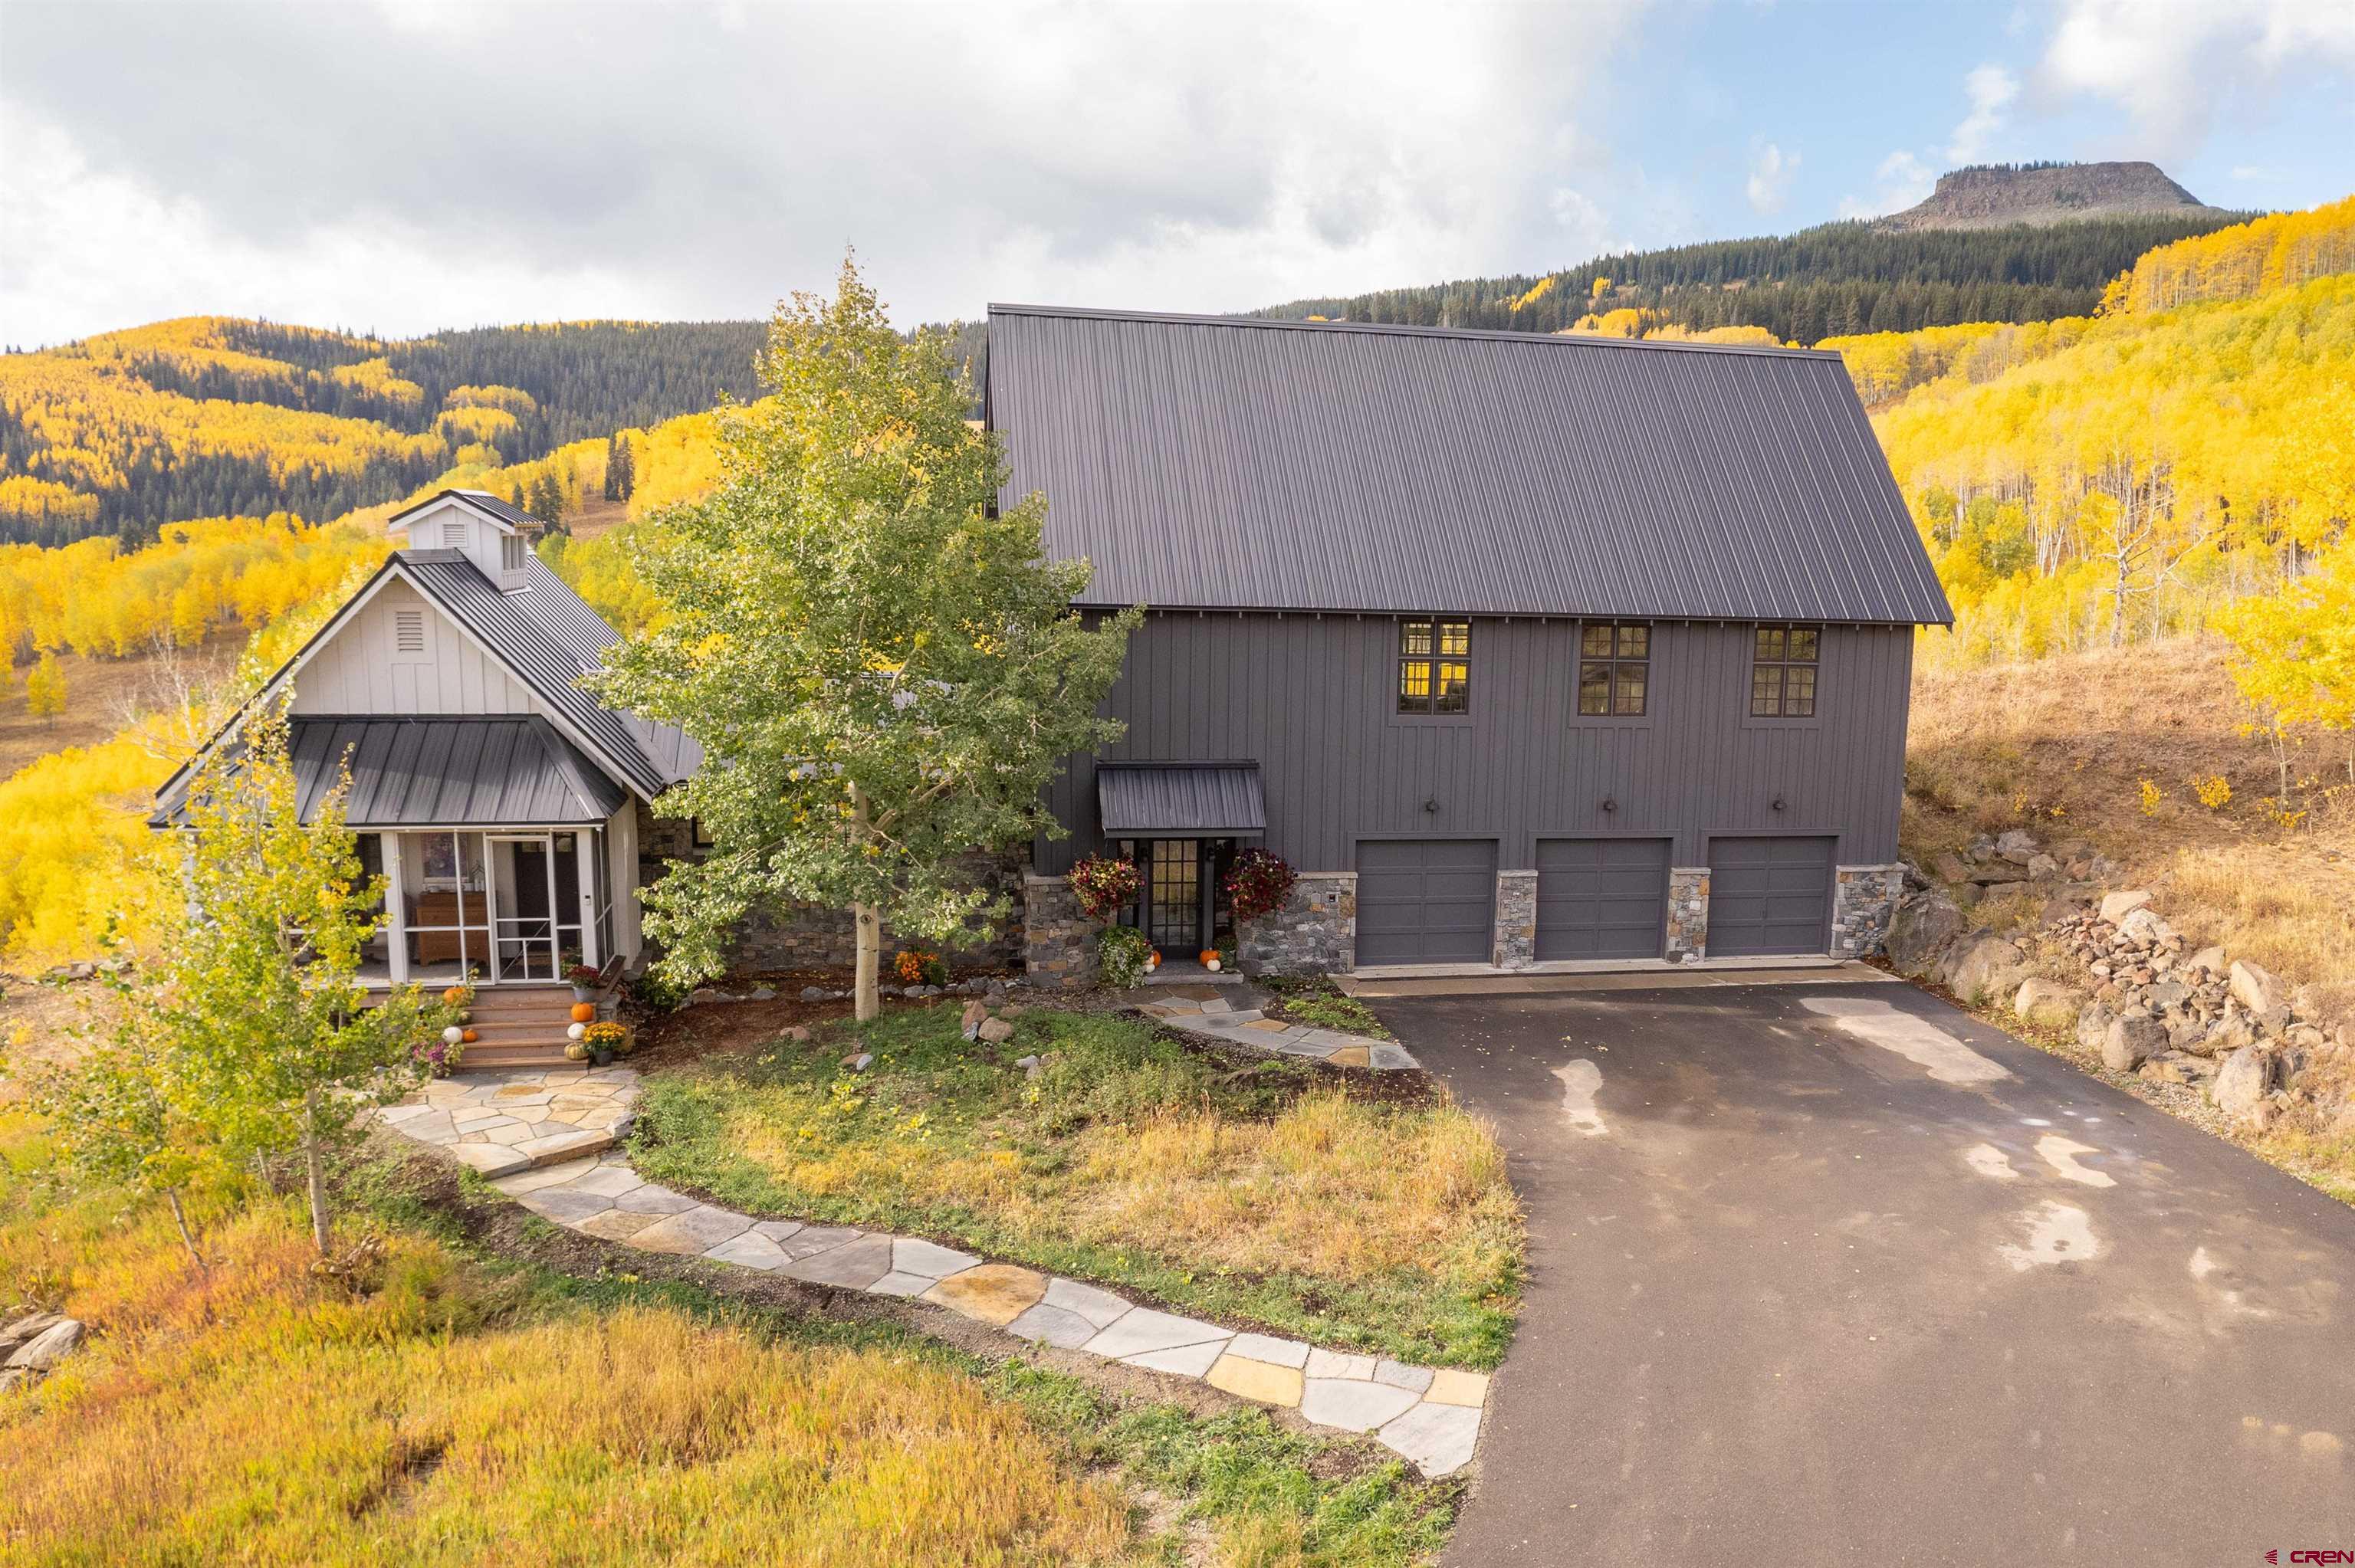 Photo of 475 Oversteeg Gulch Rd in Crested Butte, CO